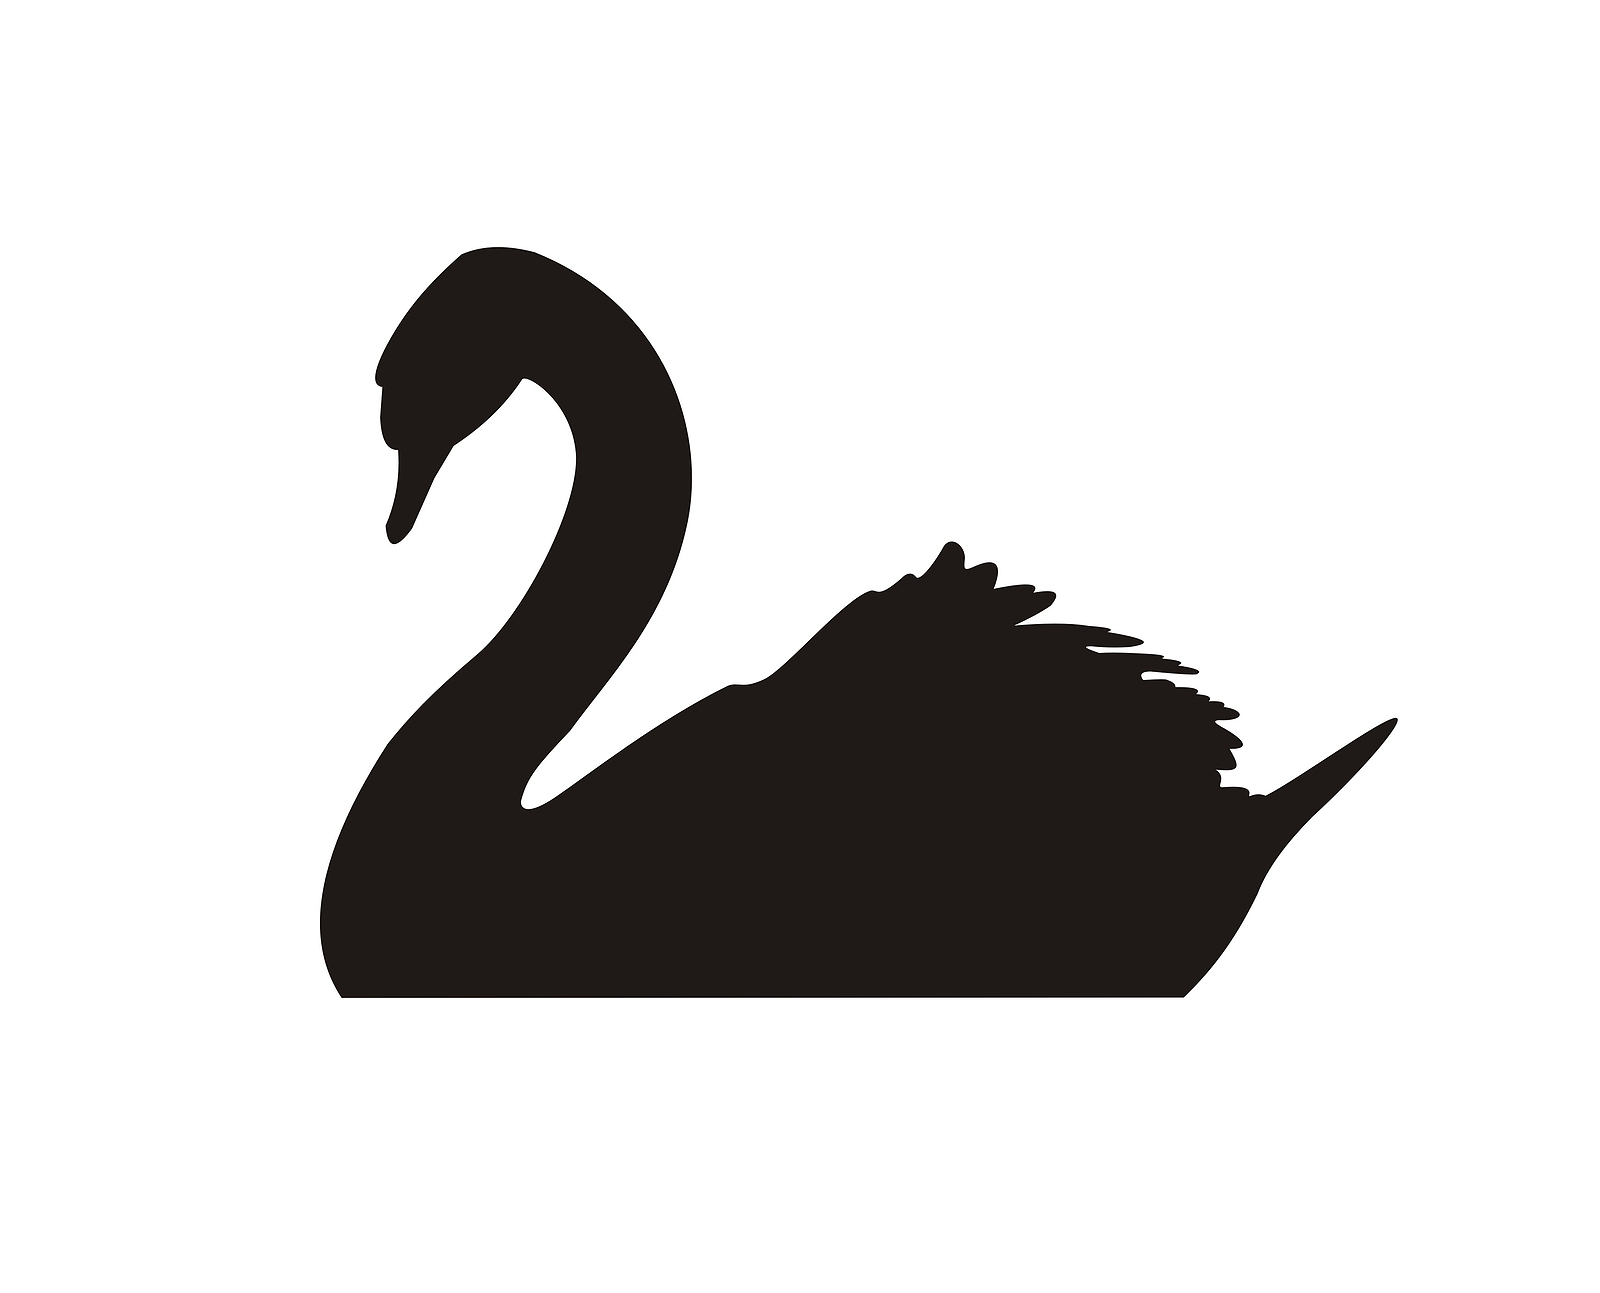 Shaping Resilient Organizations As Societies Face Black Swan Events